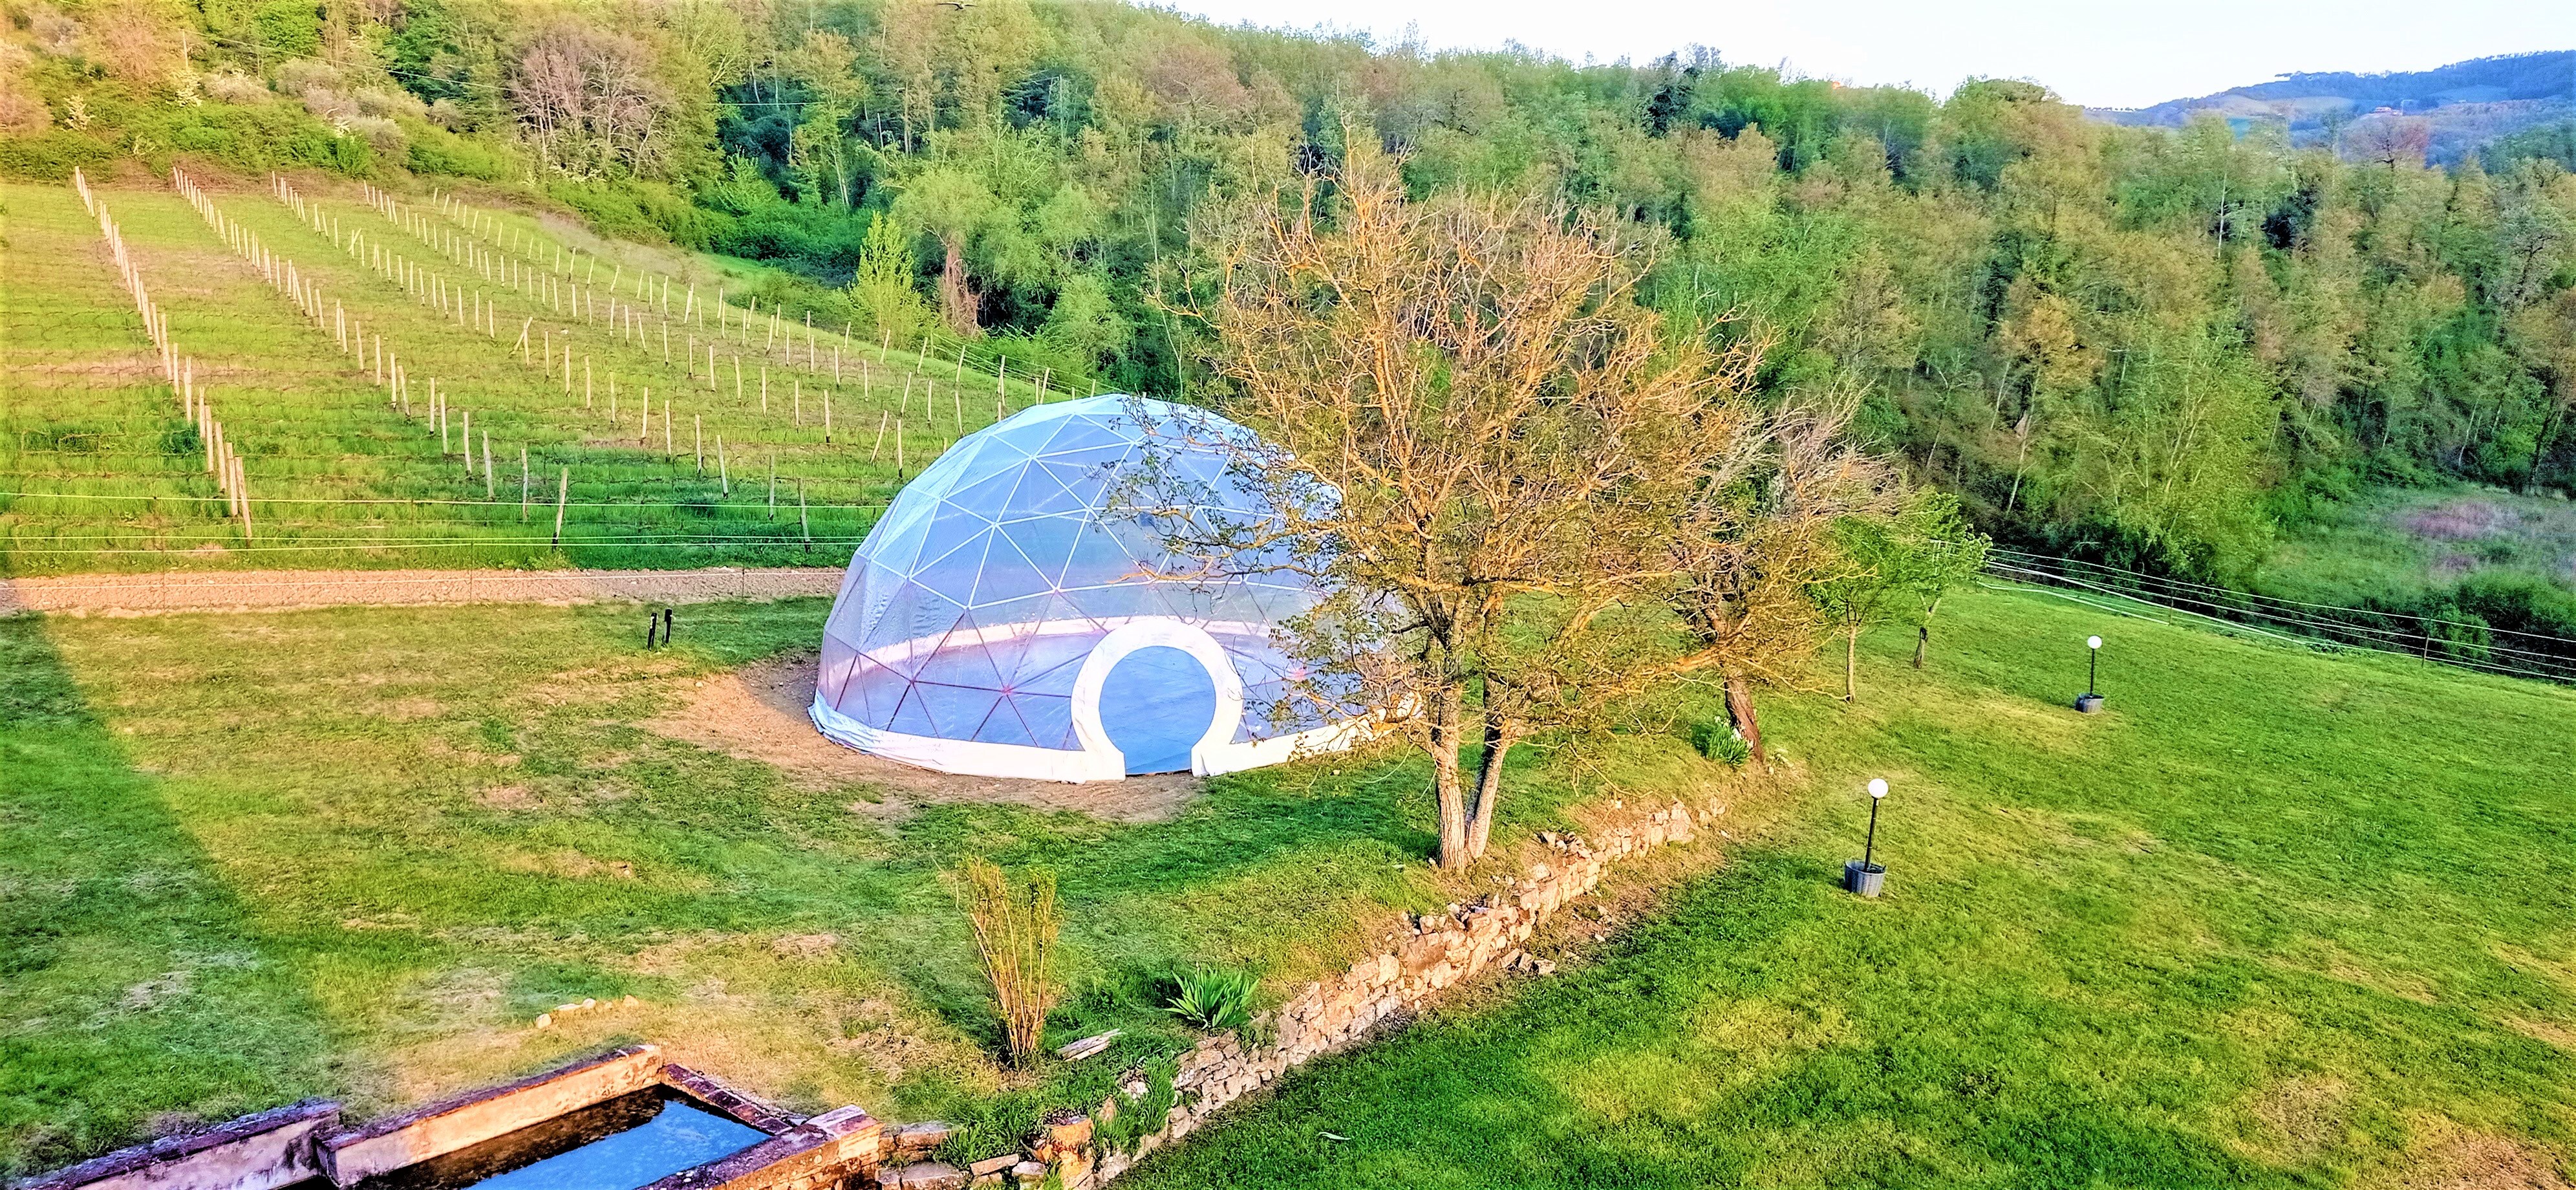 Property Image 2 - Large Farmhouse in Umbria -Swimming Pool -Cinema Room -Transparent Geodesic Dome